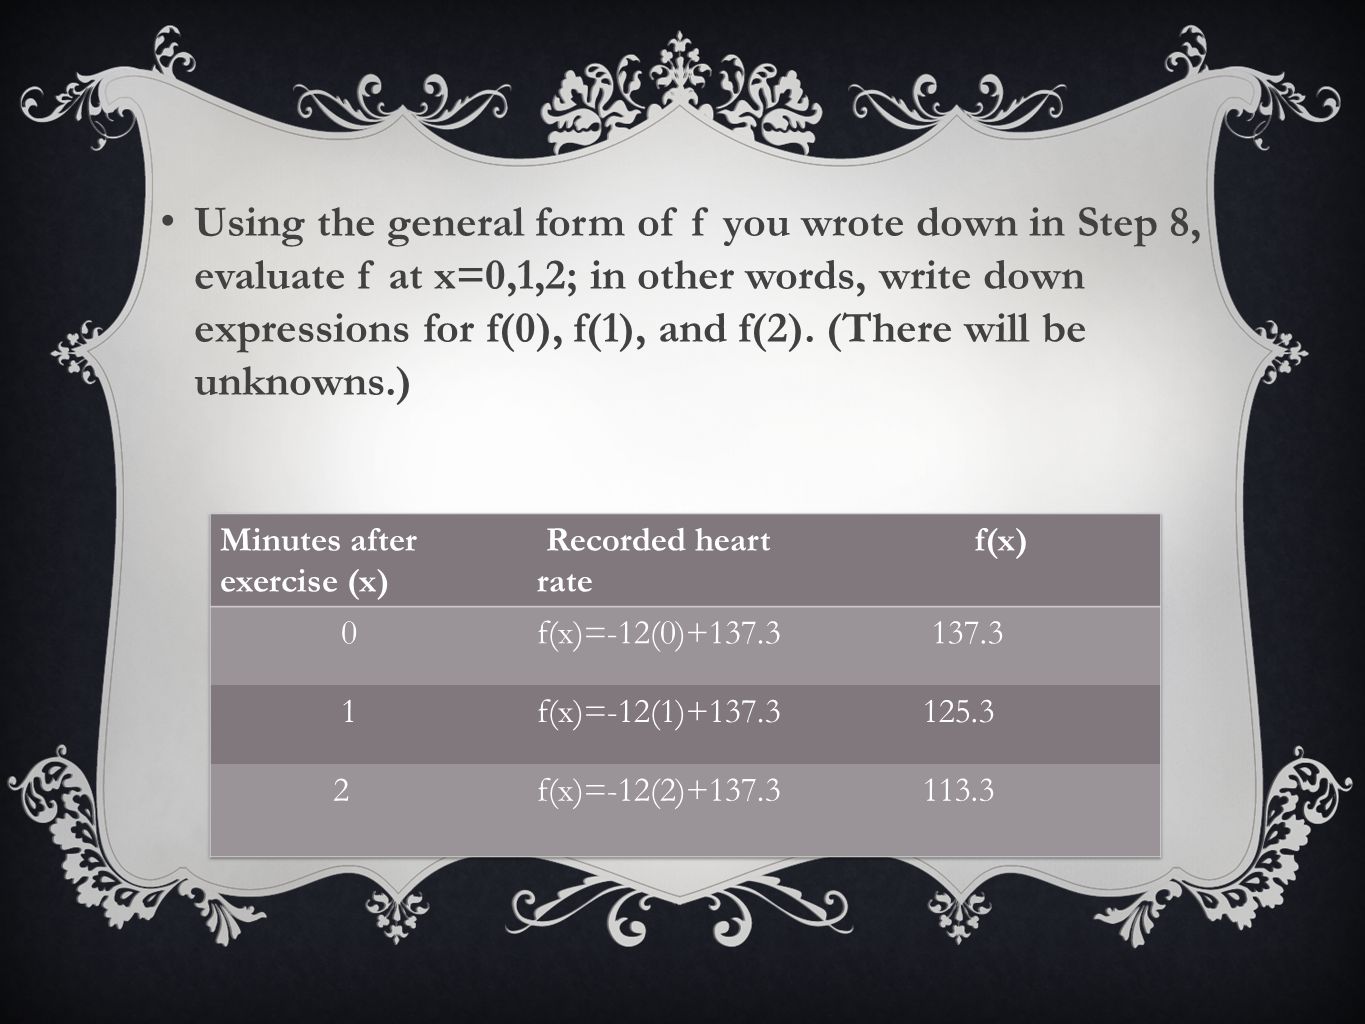 Using the general form of f you wrote down in Step 8, evaluate f at x=0,1,2; in other words, write down expressions for f(0), f(1), and f(2).